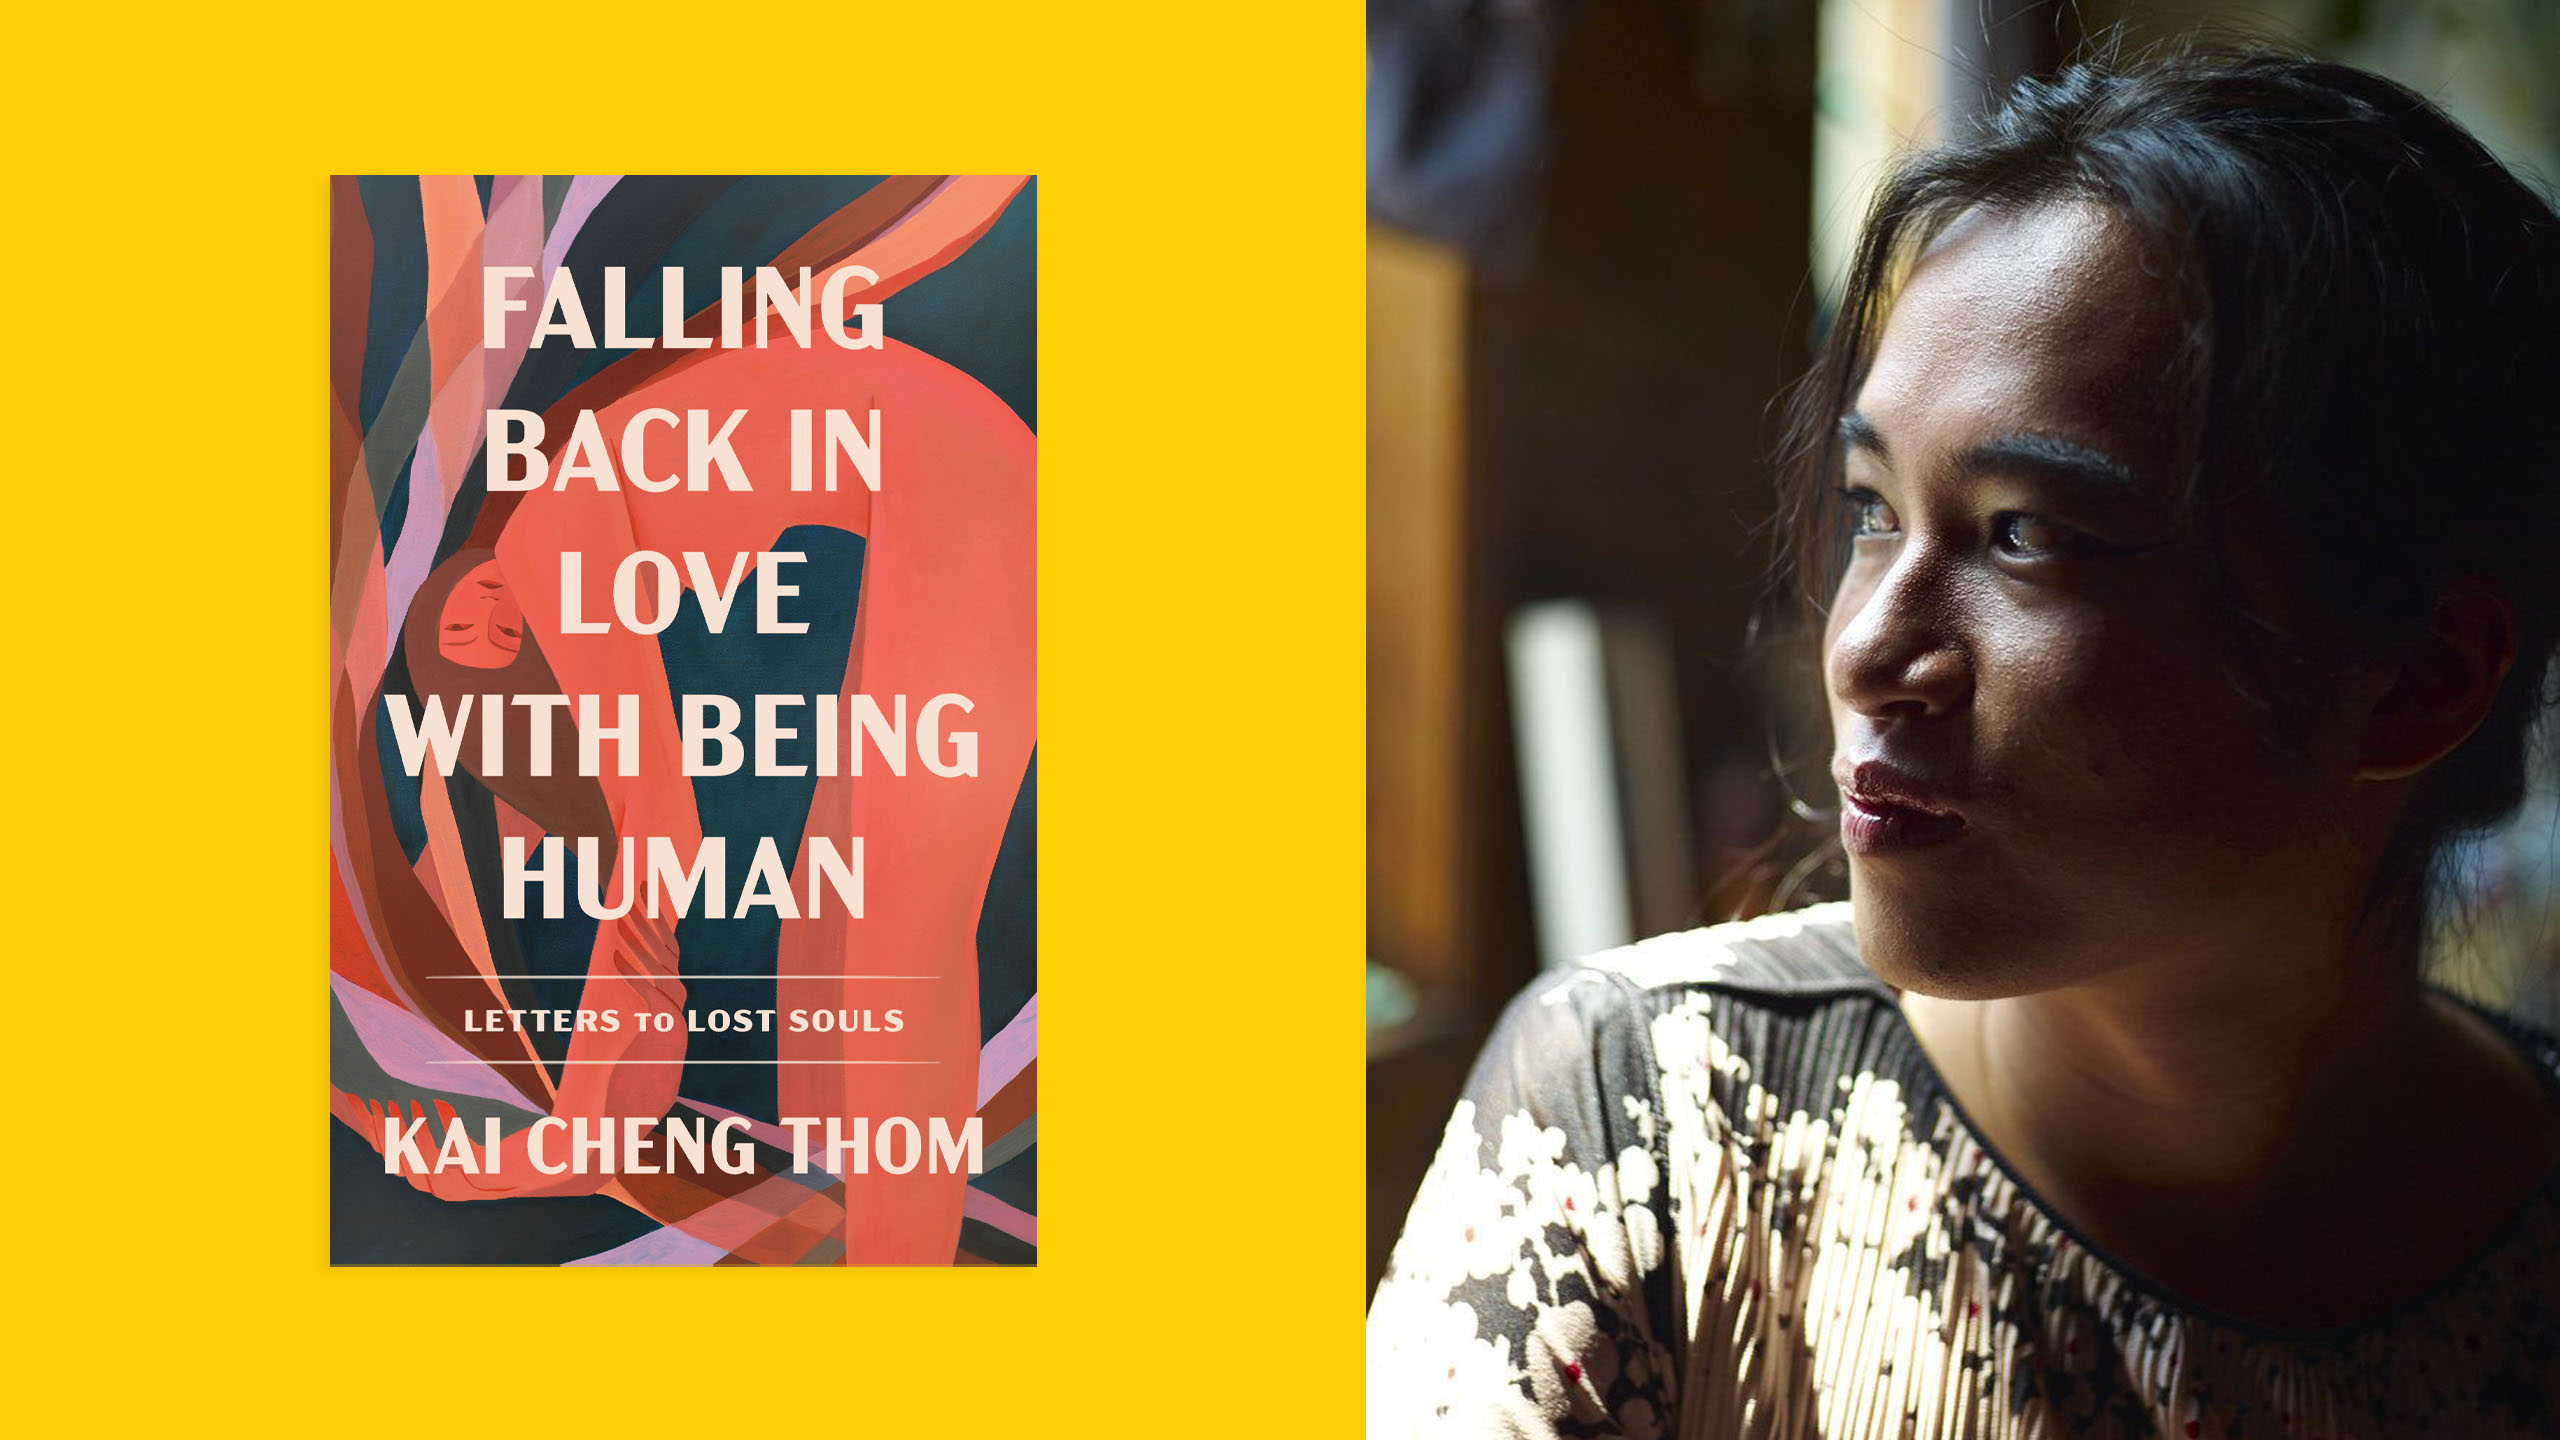 Kai Cheng Thoms Falling Back in Love with Being Human is an ode to the love letter Xtra Magazine